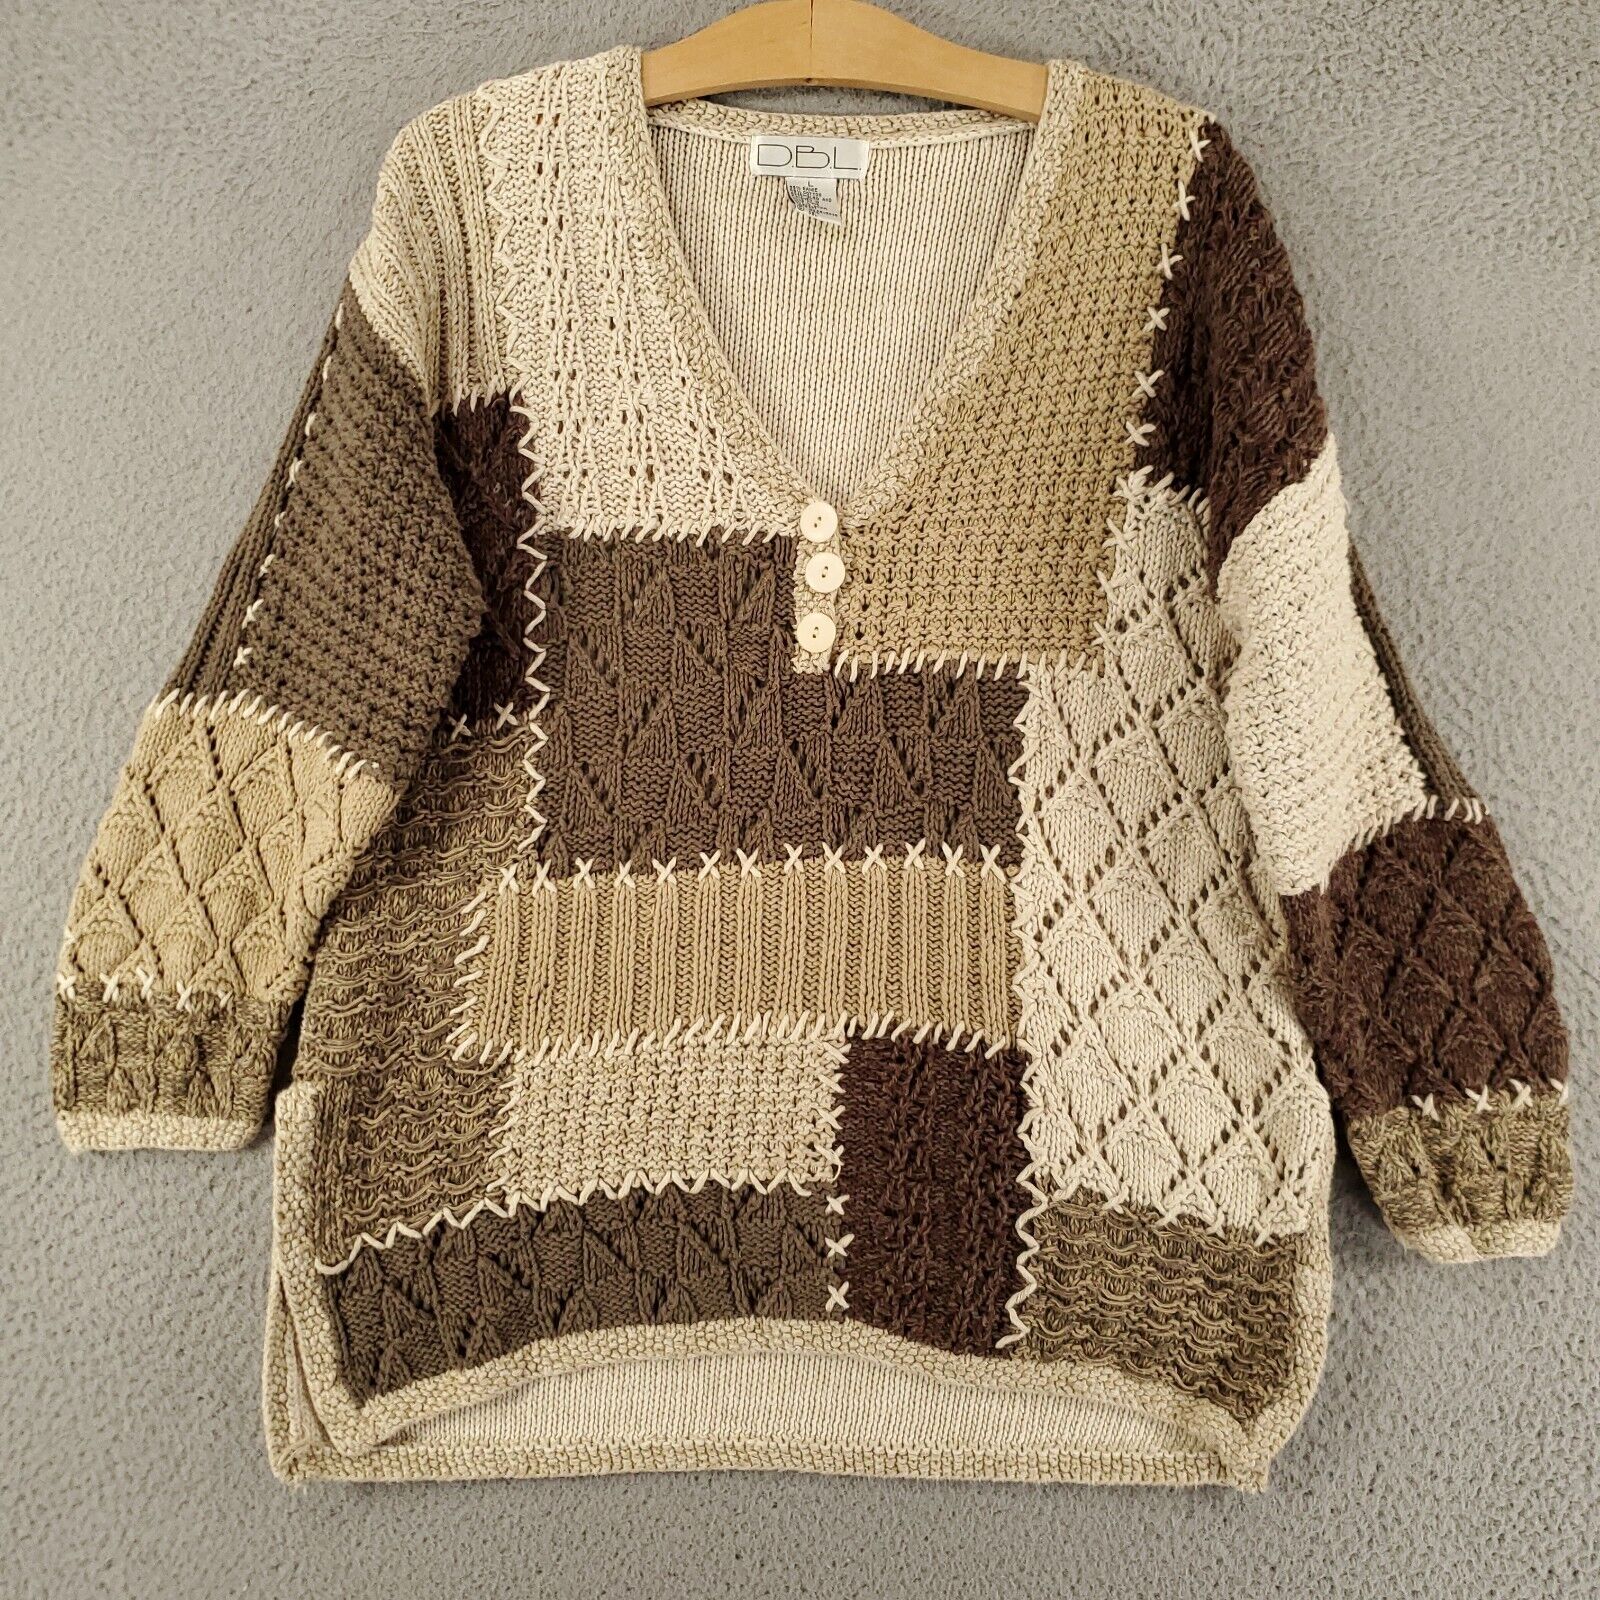 Vintage DBL Sweater Womens Large Patchwork Mixed Knit Neutrals Ramie Crochet